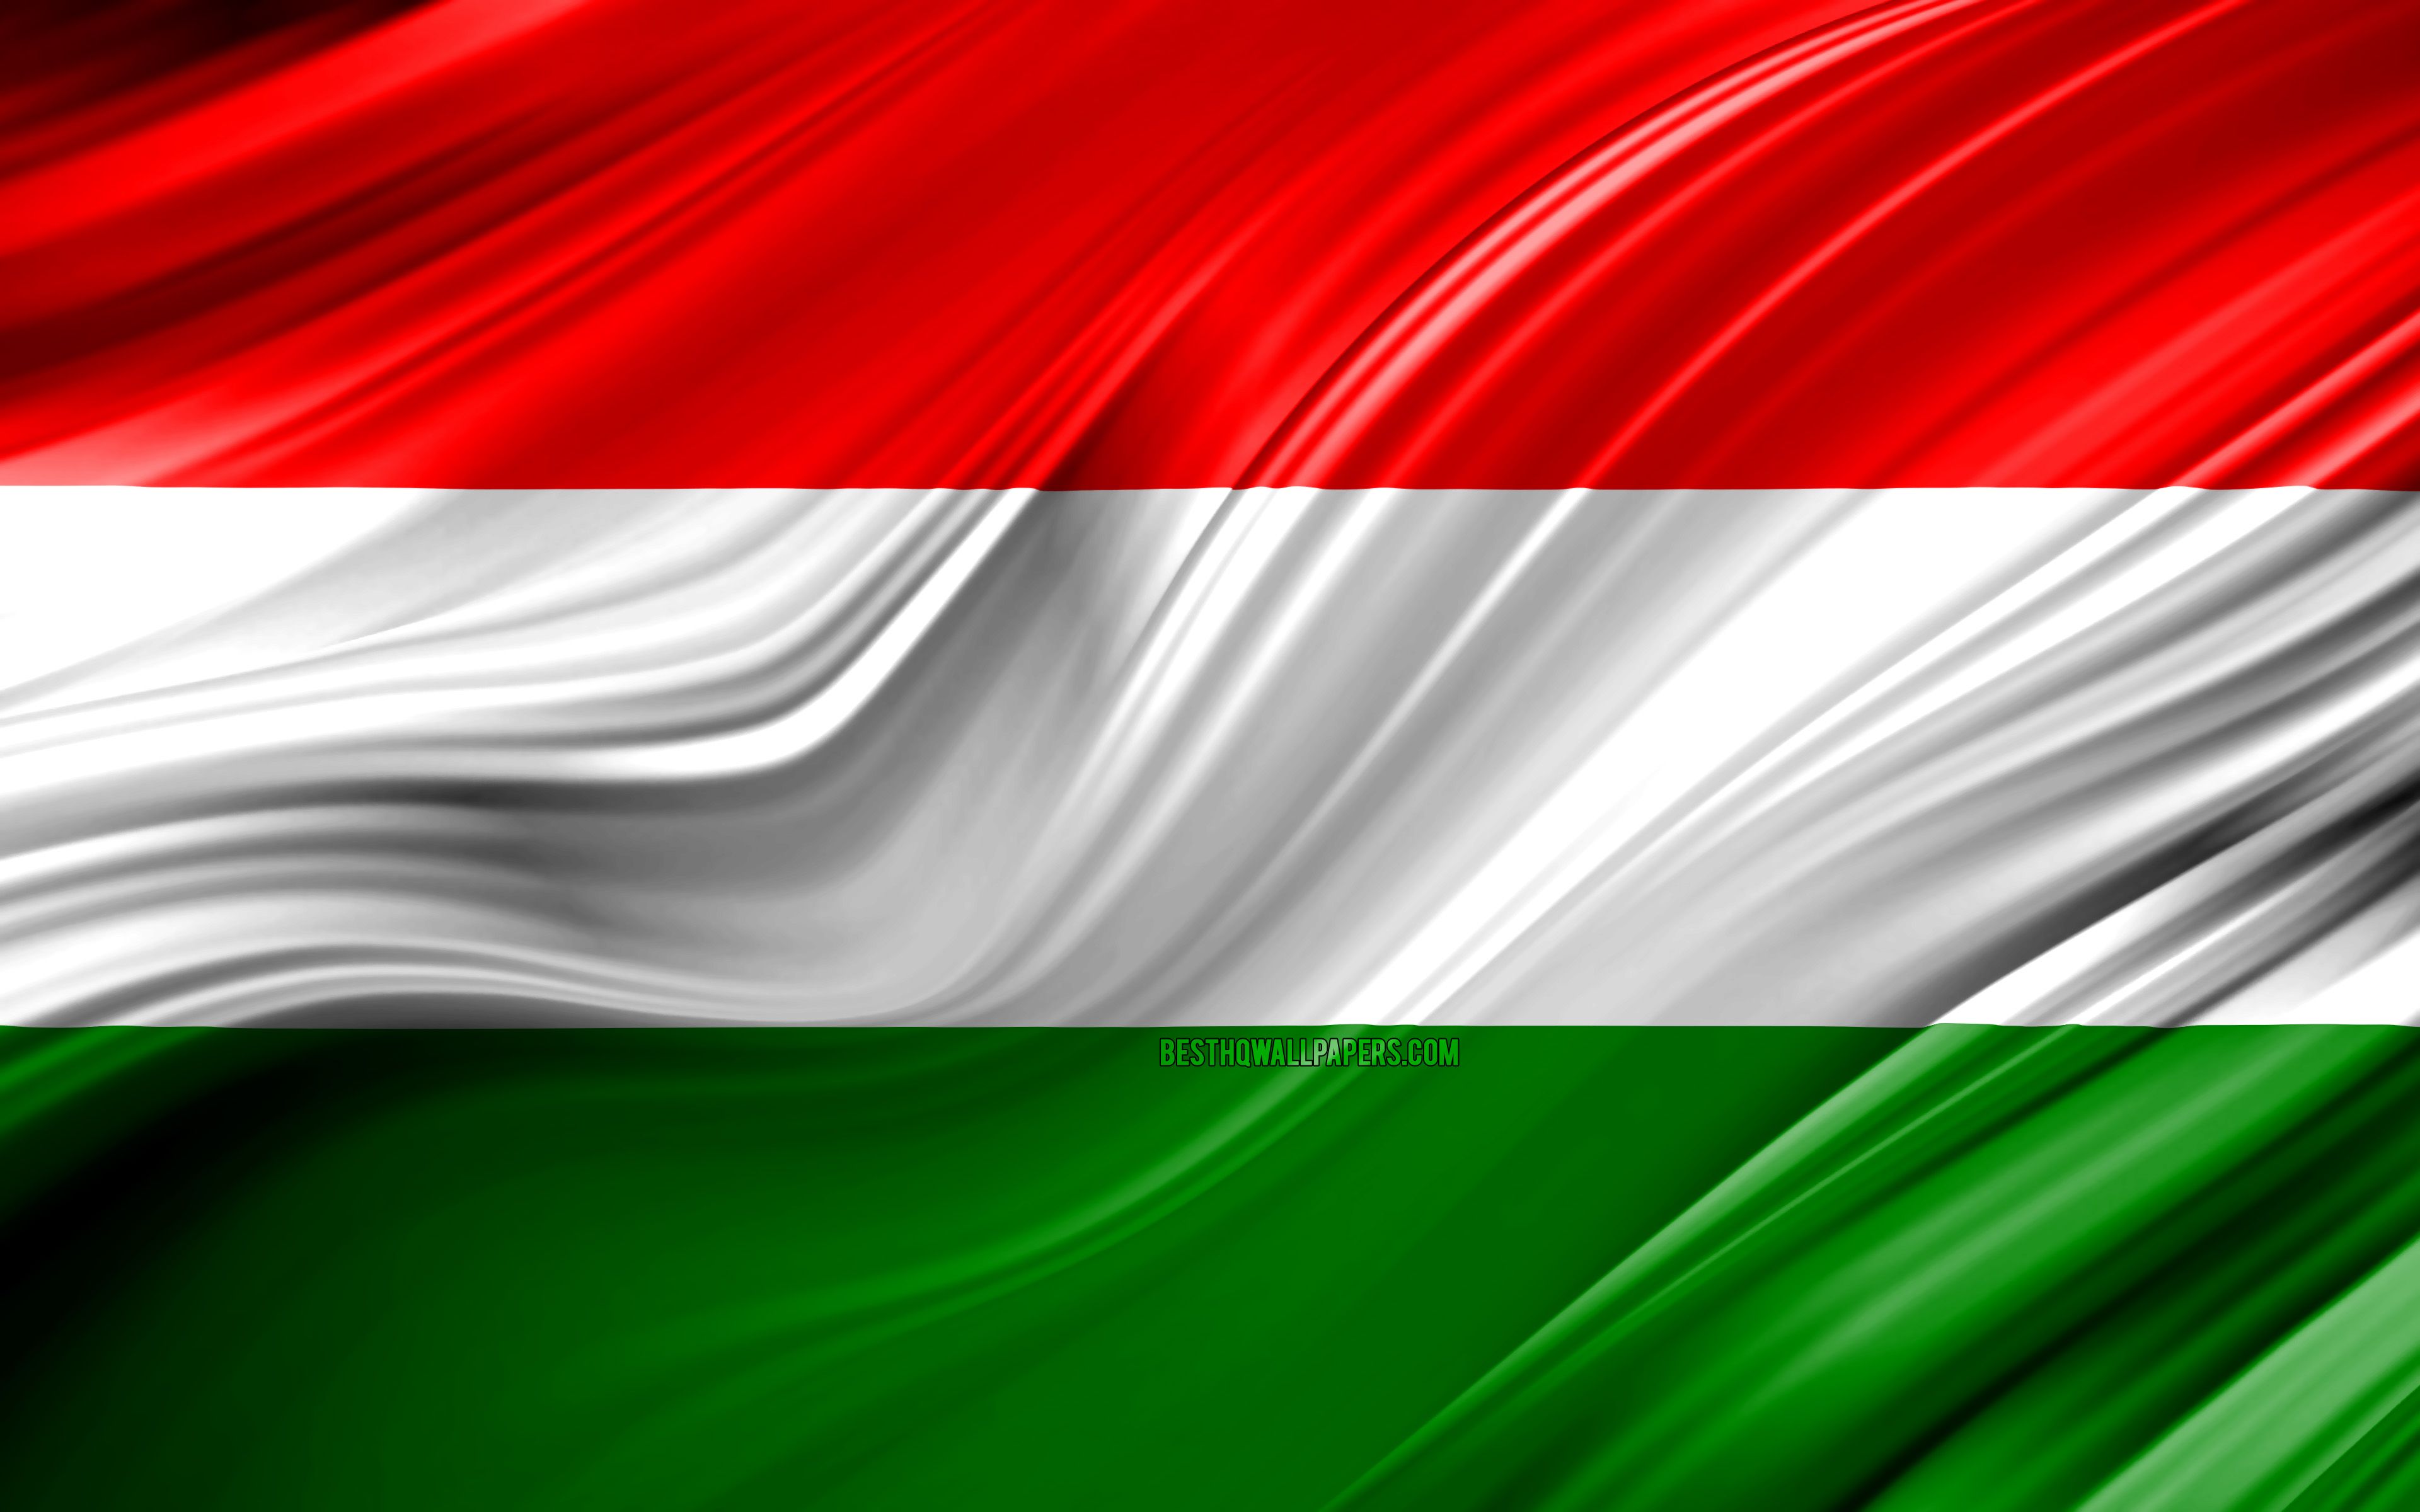 Download wallpaper 4k, Hungarian flag, European countries, 3D waves, Flag of Hungary, national symbols, Hungary 3D flag, art, Europe, Hungary for desktop with resolution 3840x2400. High Quality HD picture wallpaper